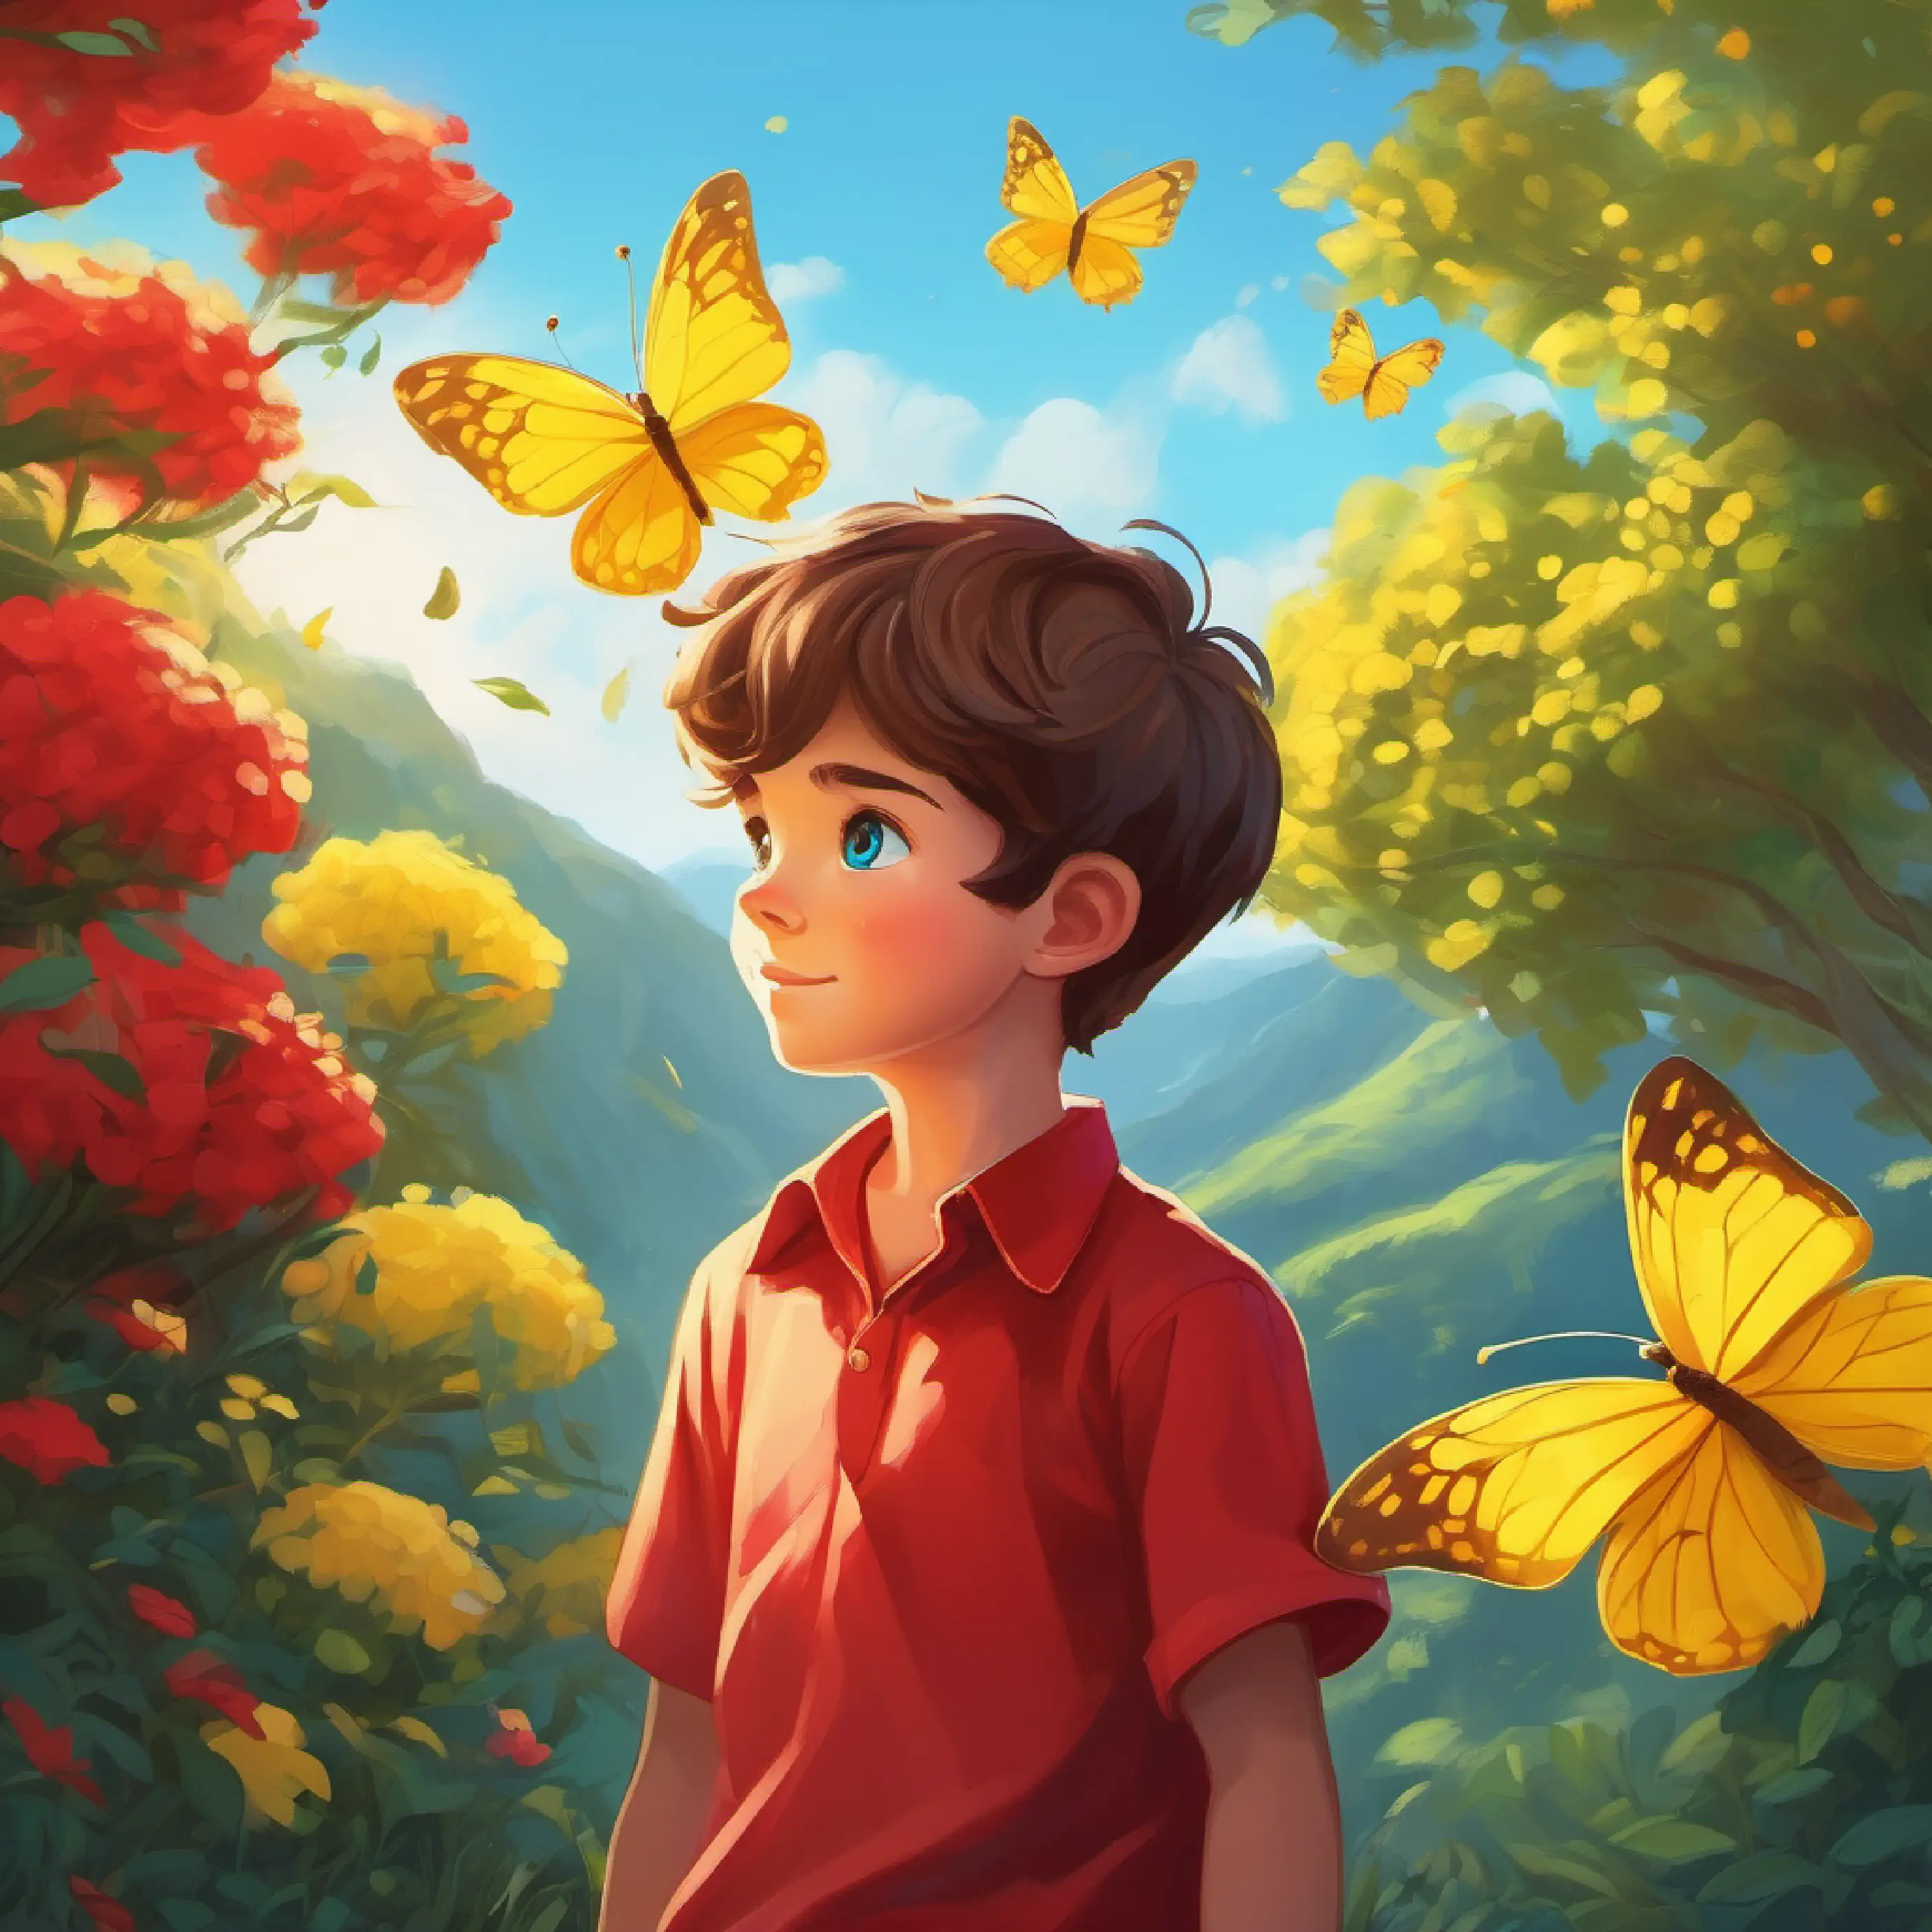 A bright yellow butterfly catches Young boy, short brown hair, bright blue eyes, wearing a red shirt's attention.